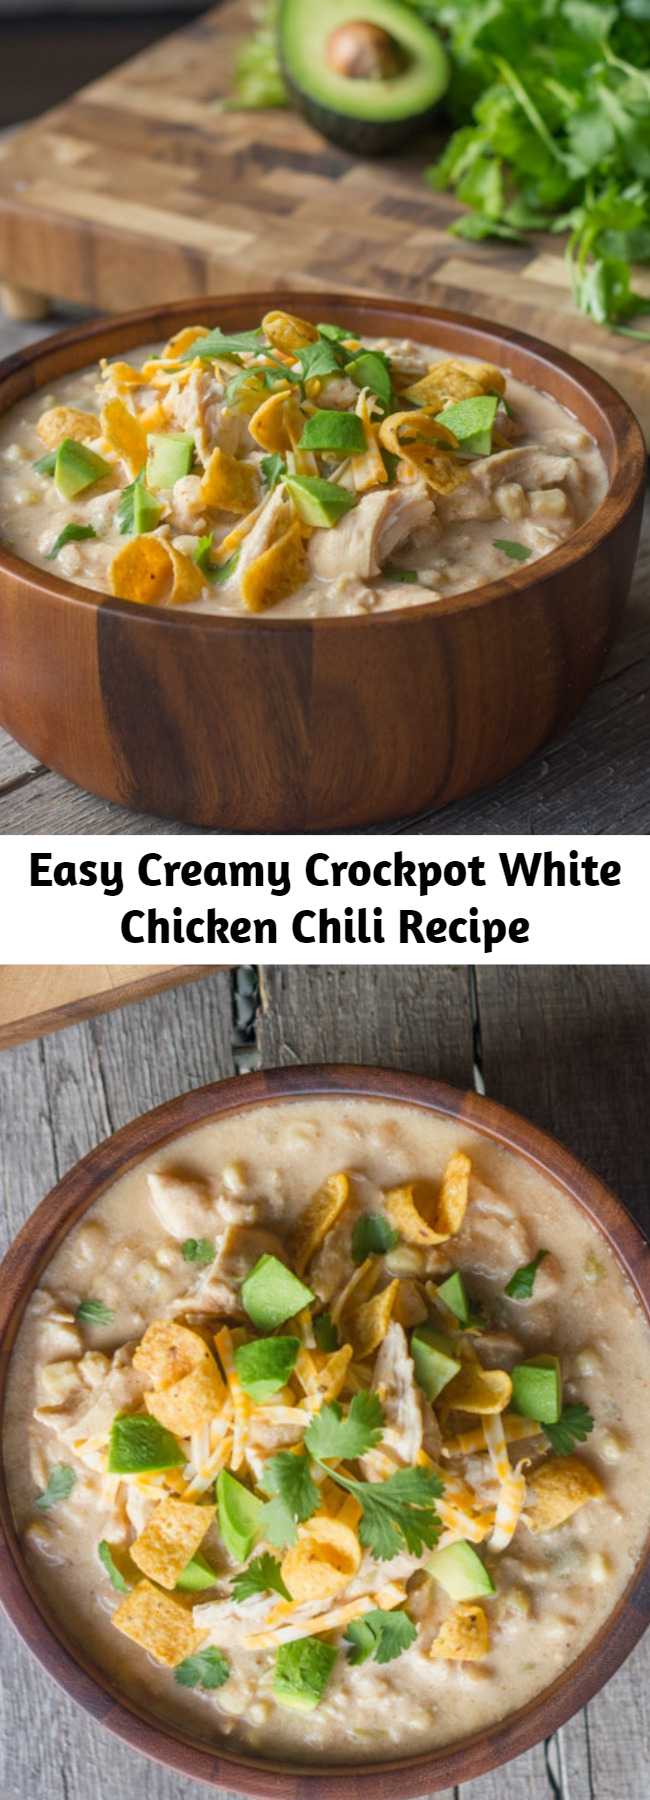 Easy Creamy Crockpot White Chicken Chili Recipe - It’s one of my family’s favorite meals in the wintertime. Go crazy with the toppings if you can!  Fritos, shredded cheese, avocado, cilantro, and sour cream are my favorite.